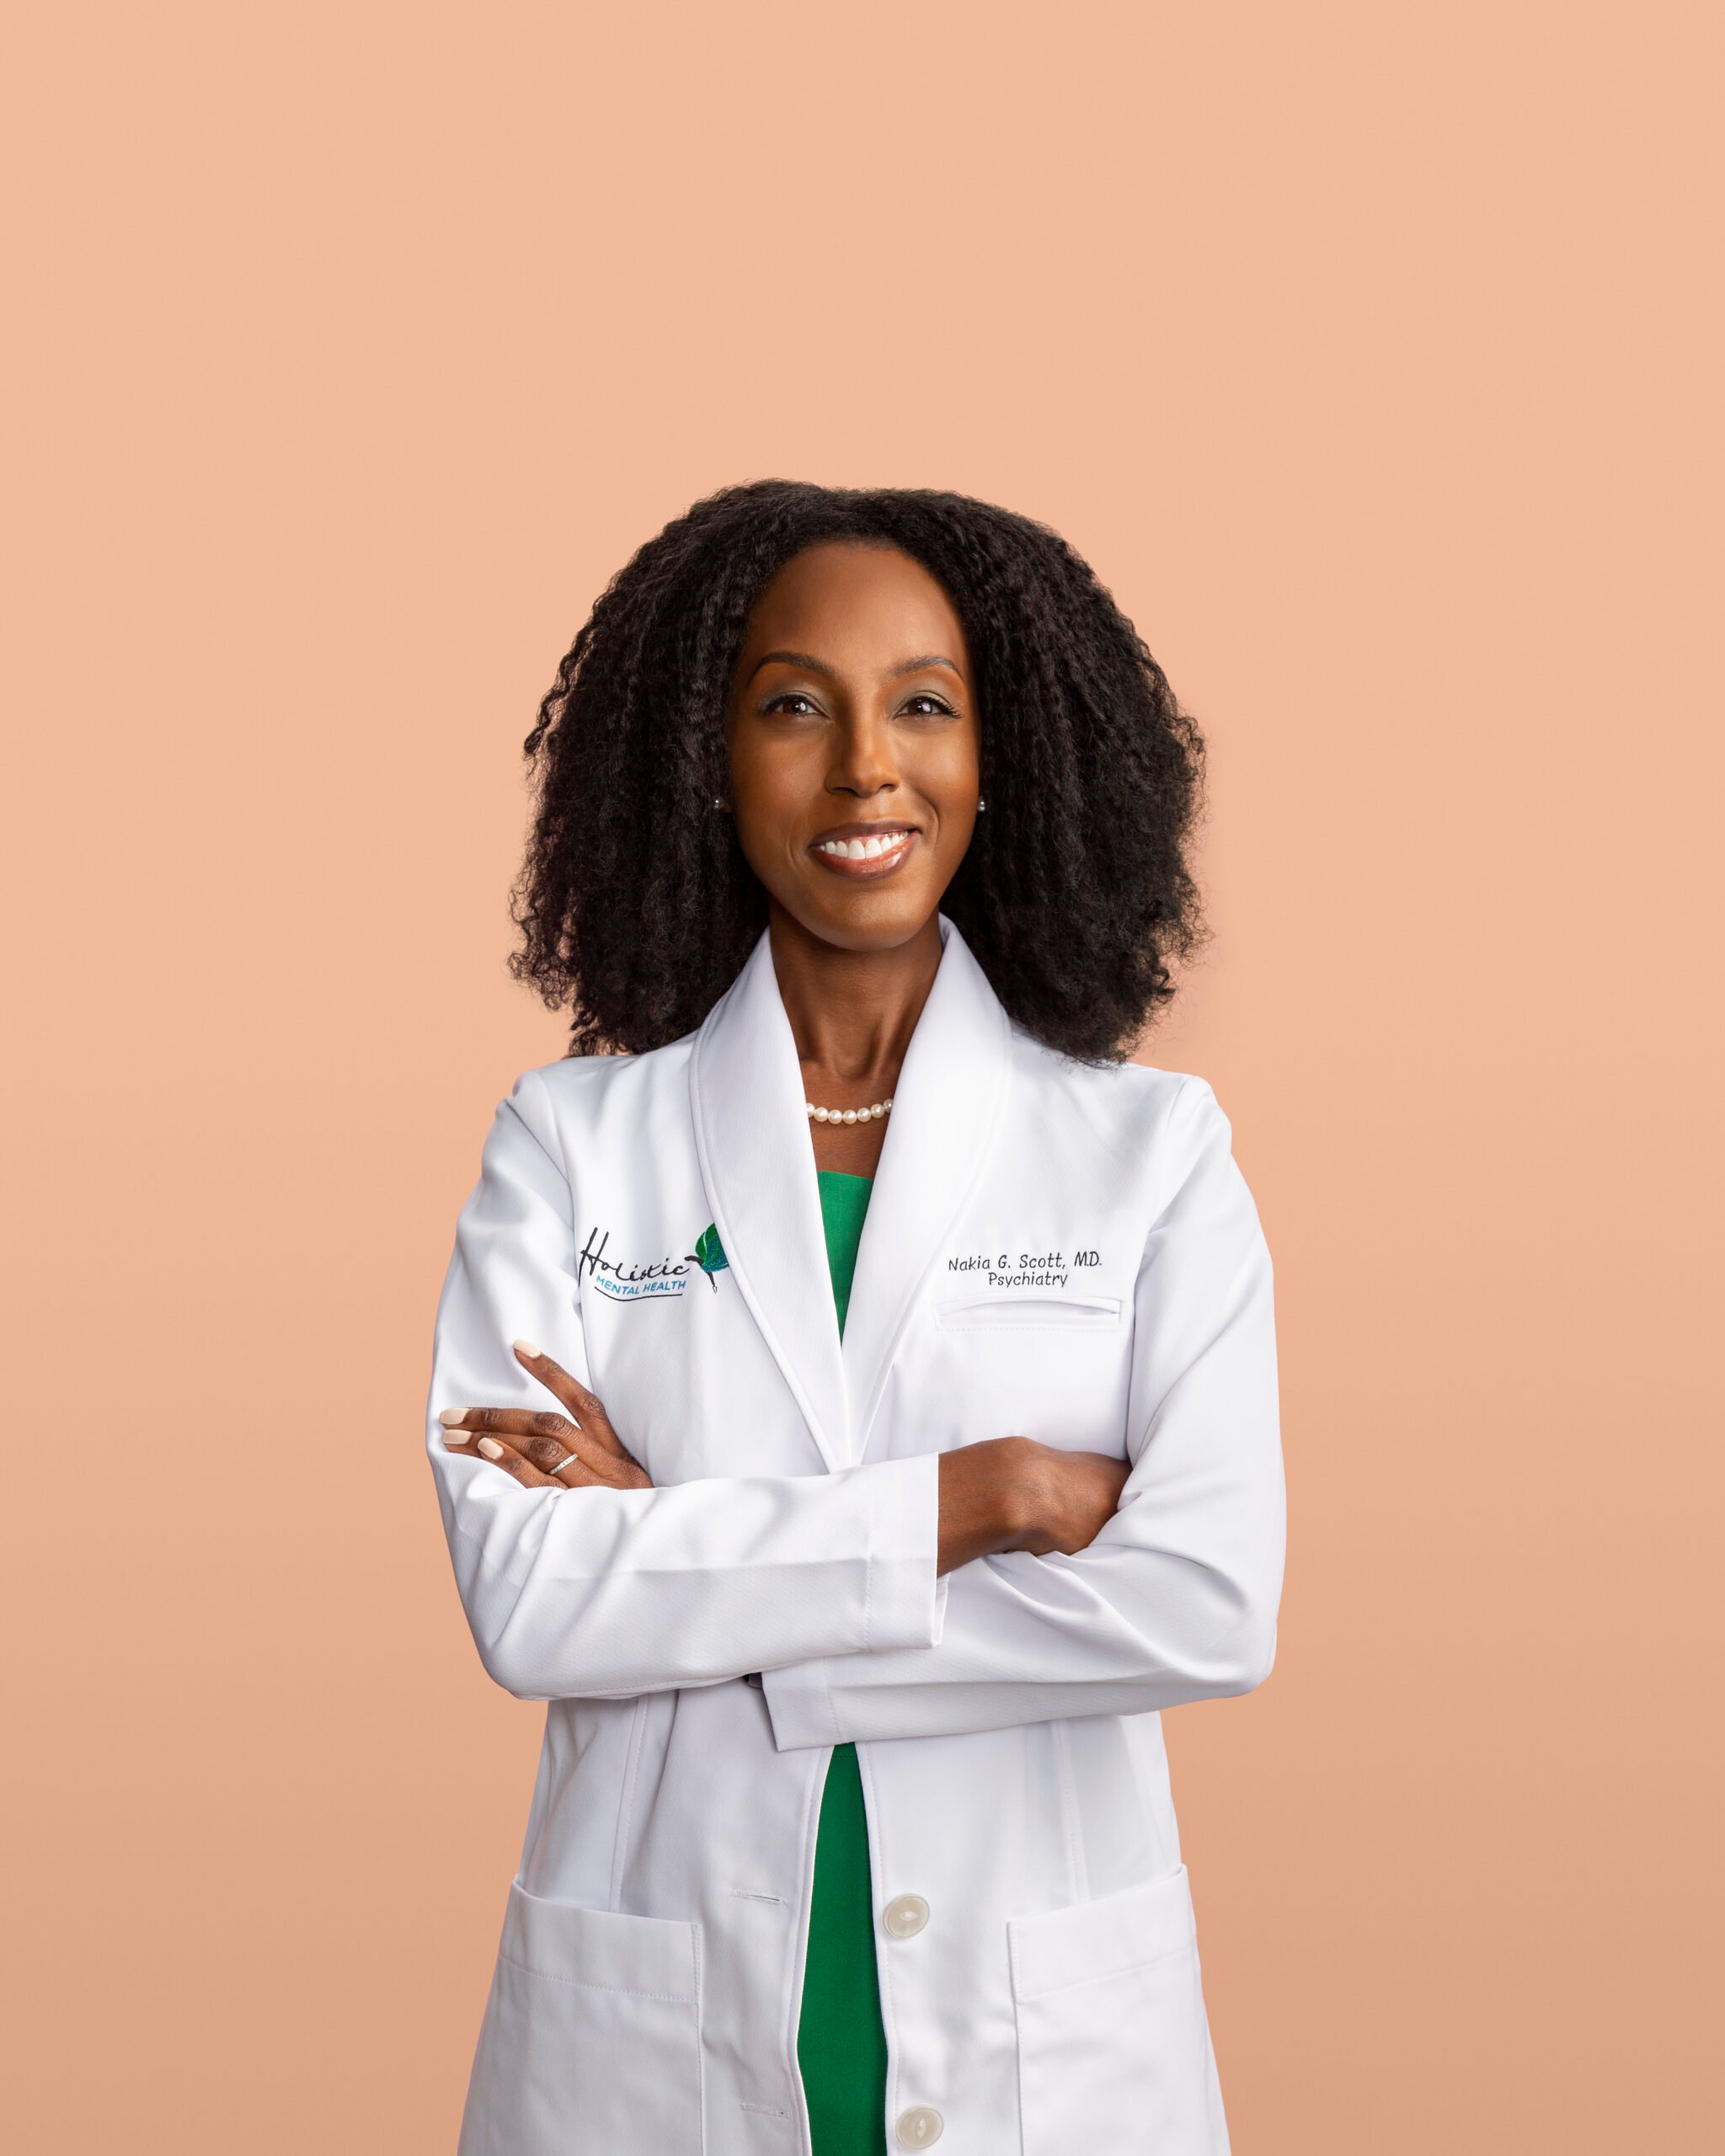 Bill Sallans' photo of Dr. Nakia G. Scott, M.D. with a desaturated peach background